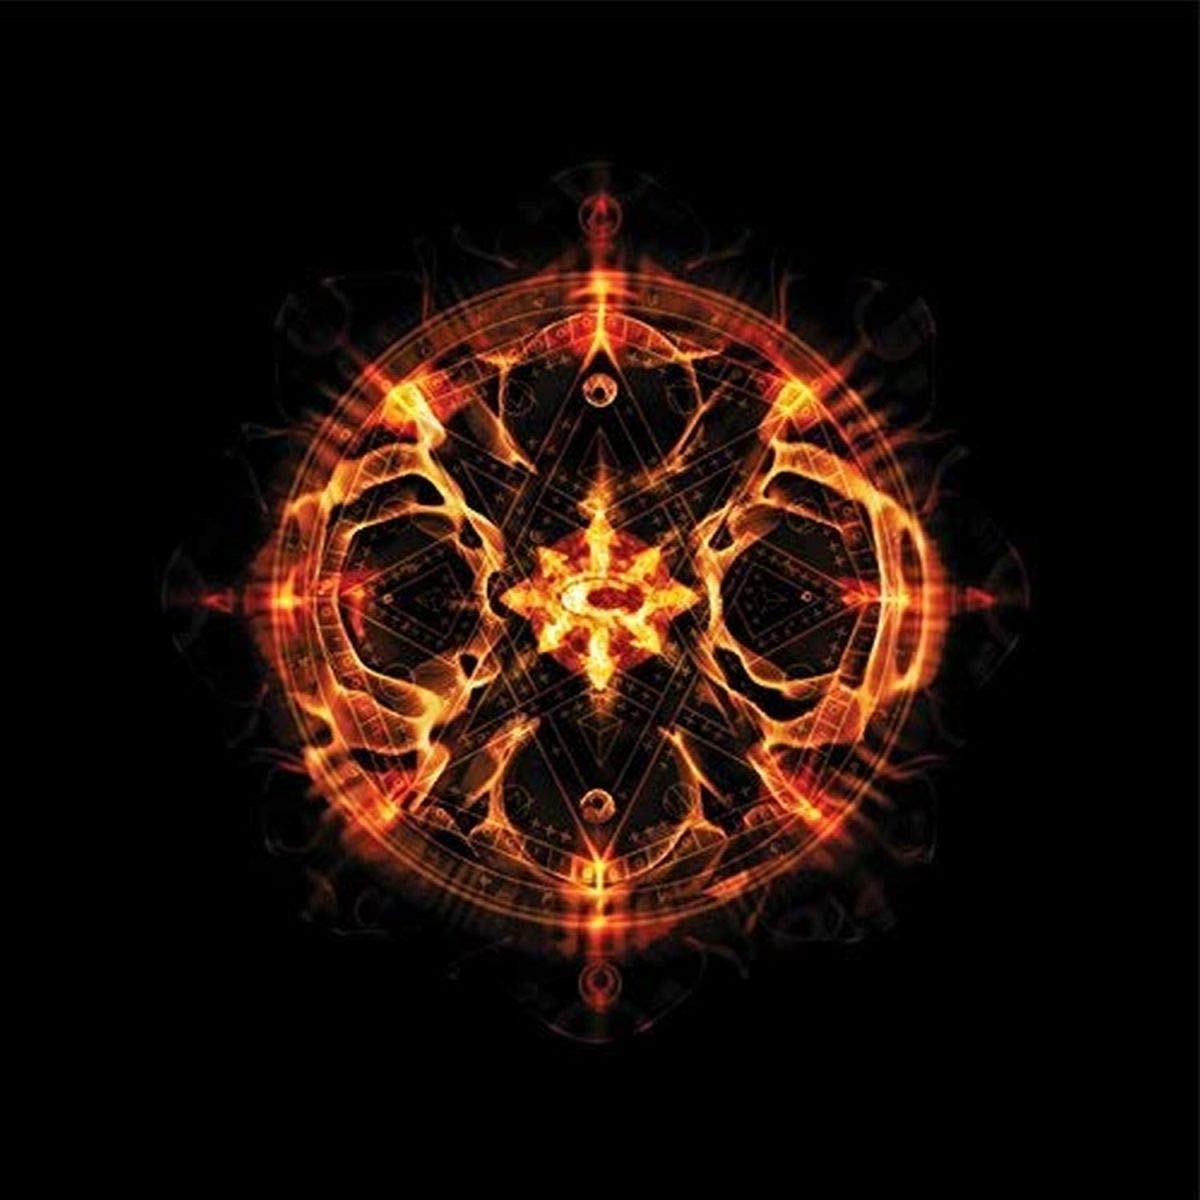 Chimaira: The Age of Hell (2011)